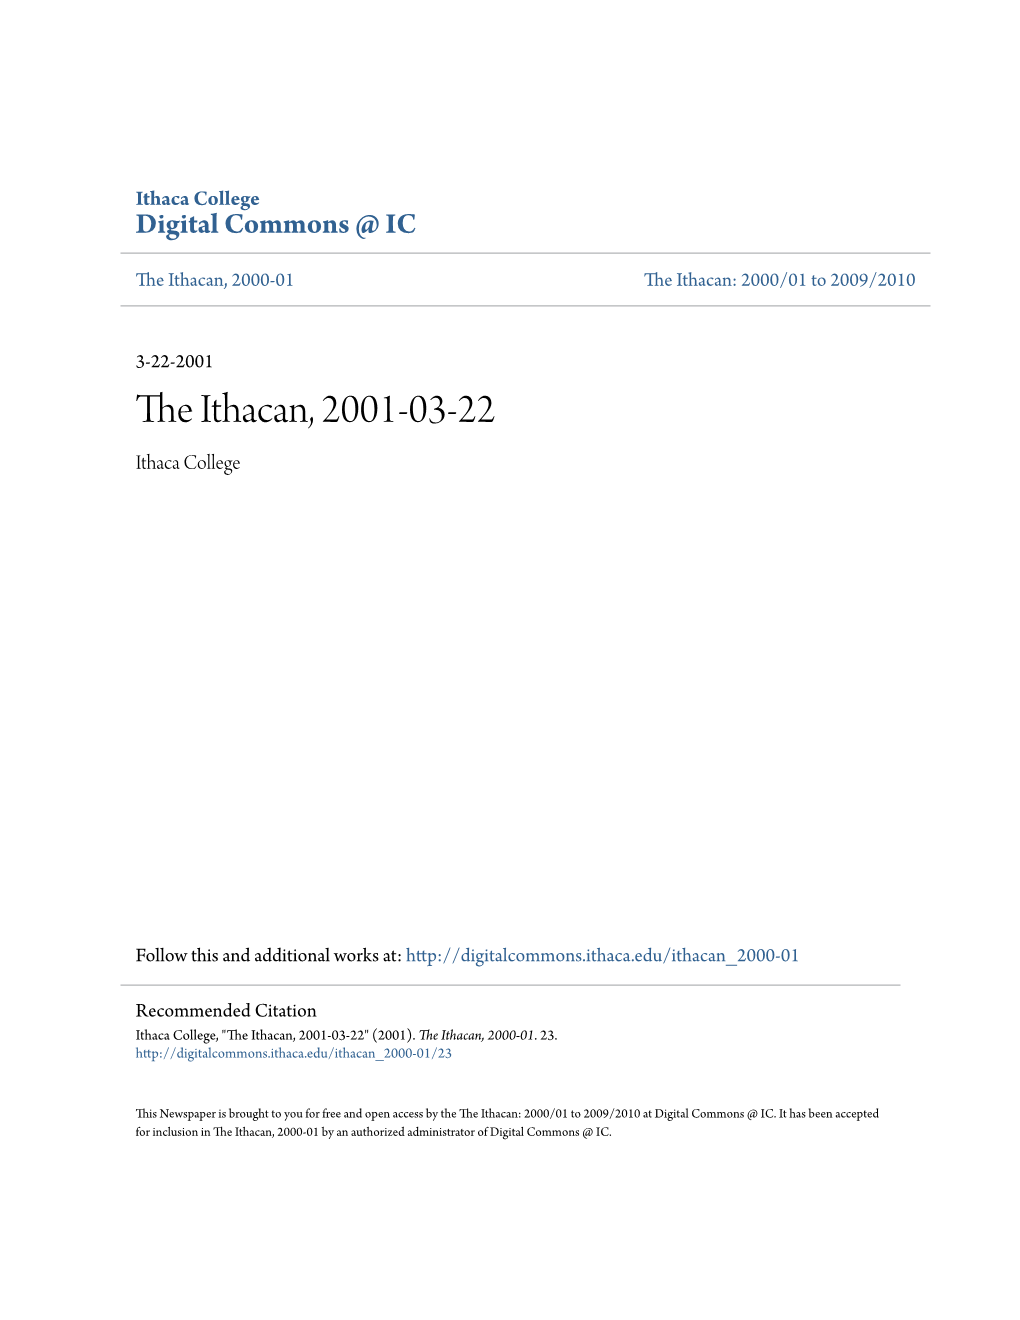 The Ithacan, 2001-03-22